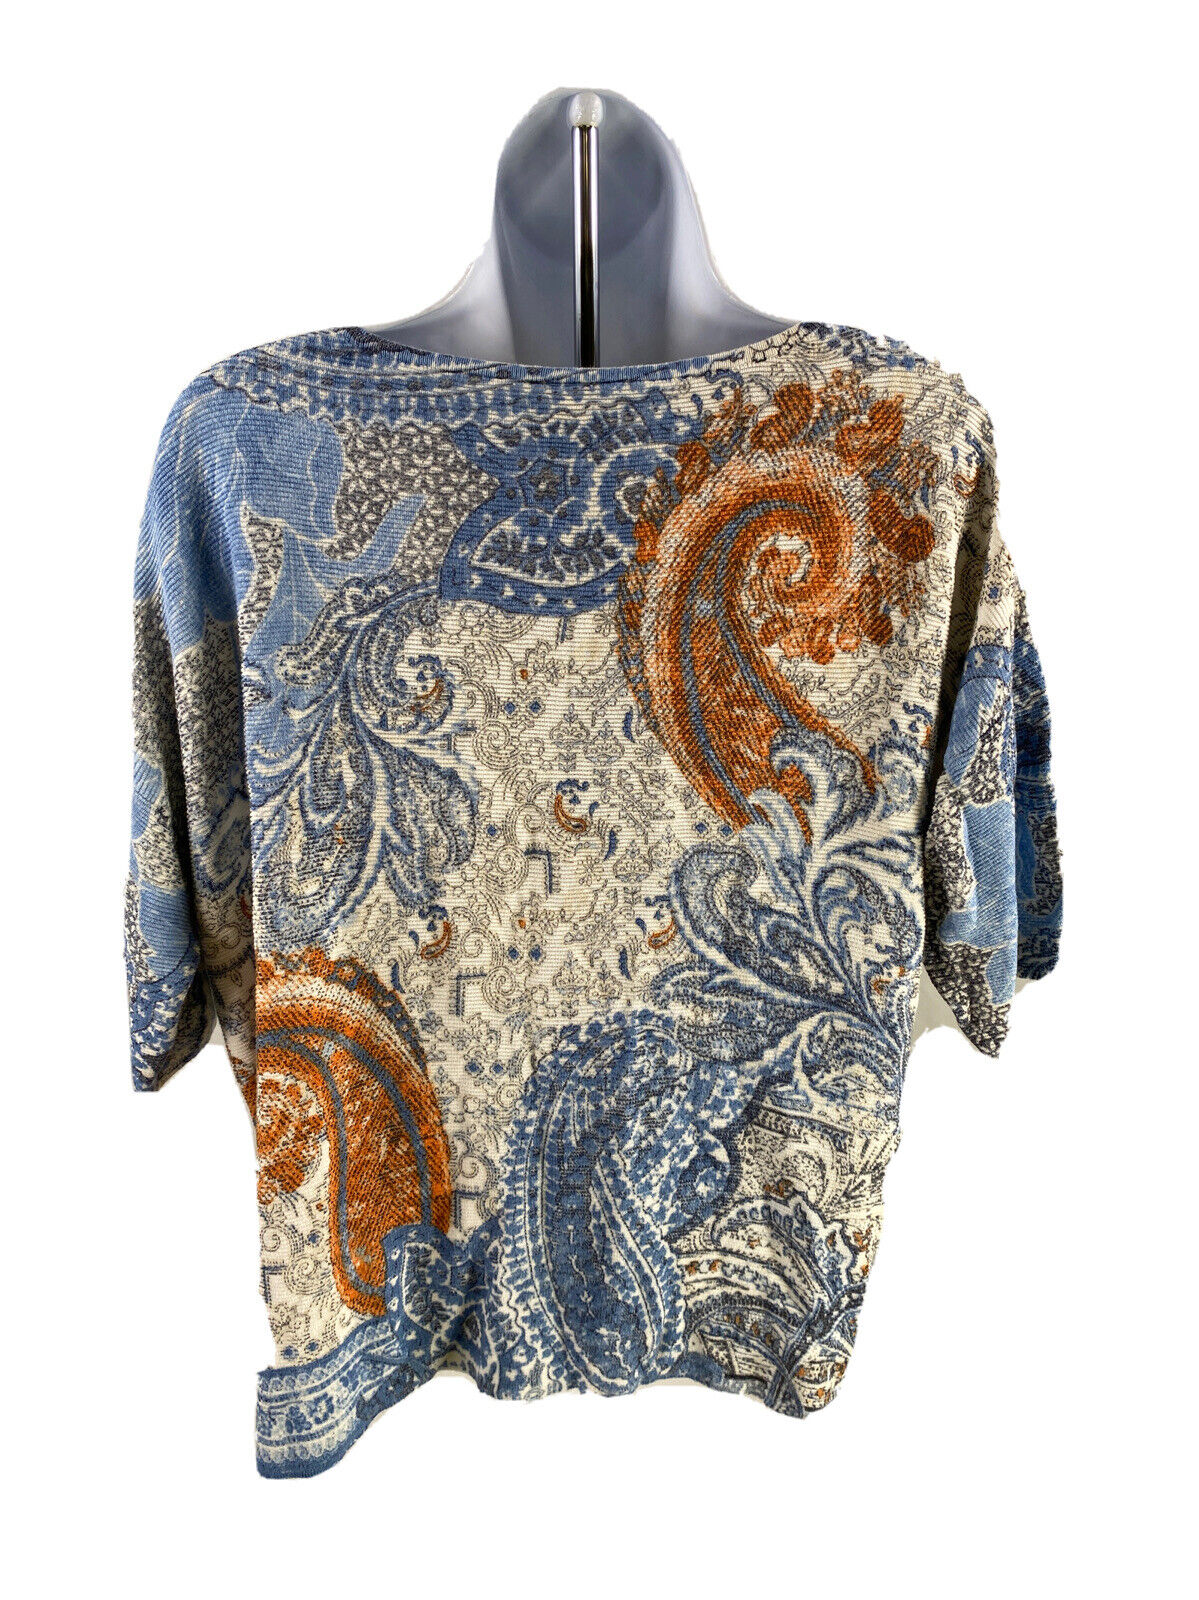 Chico's Women's Blue Paisley Short Sleeve Knit Sweater Top - 2/US L